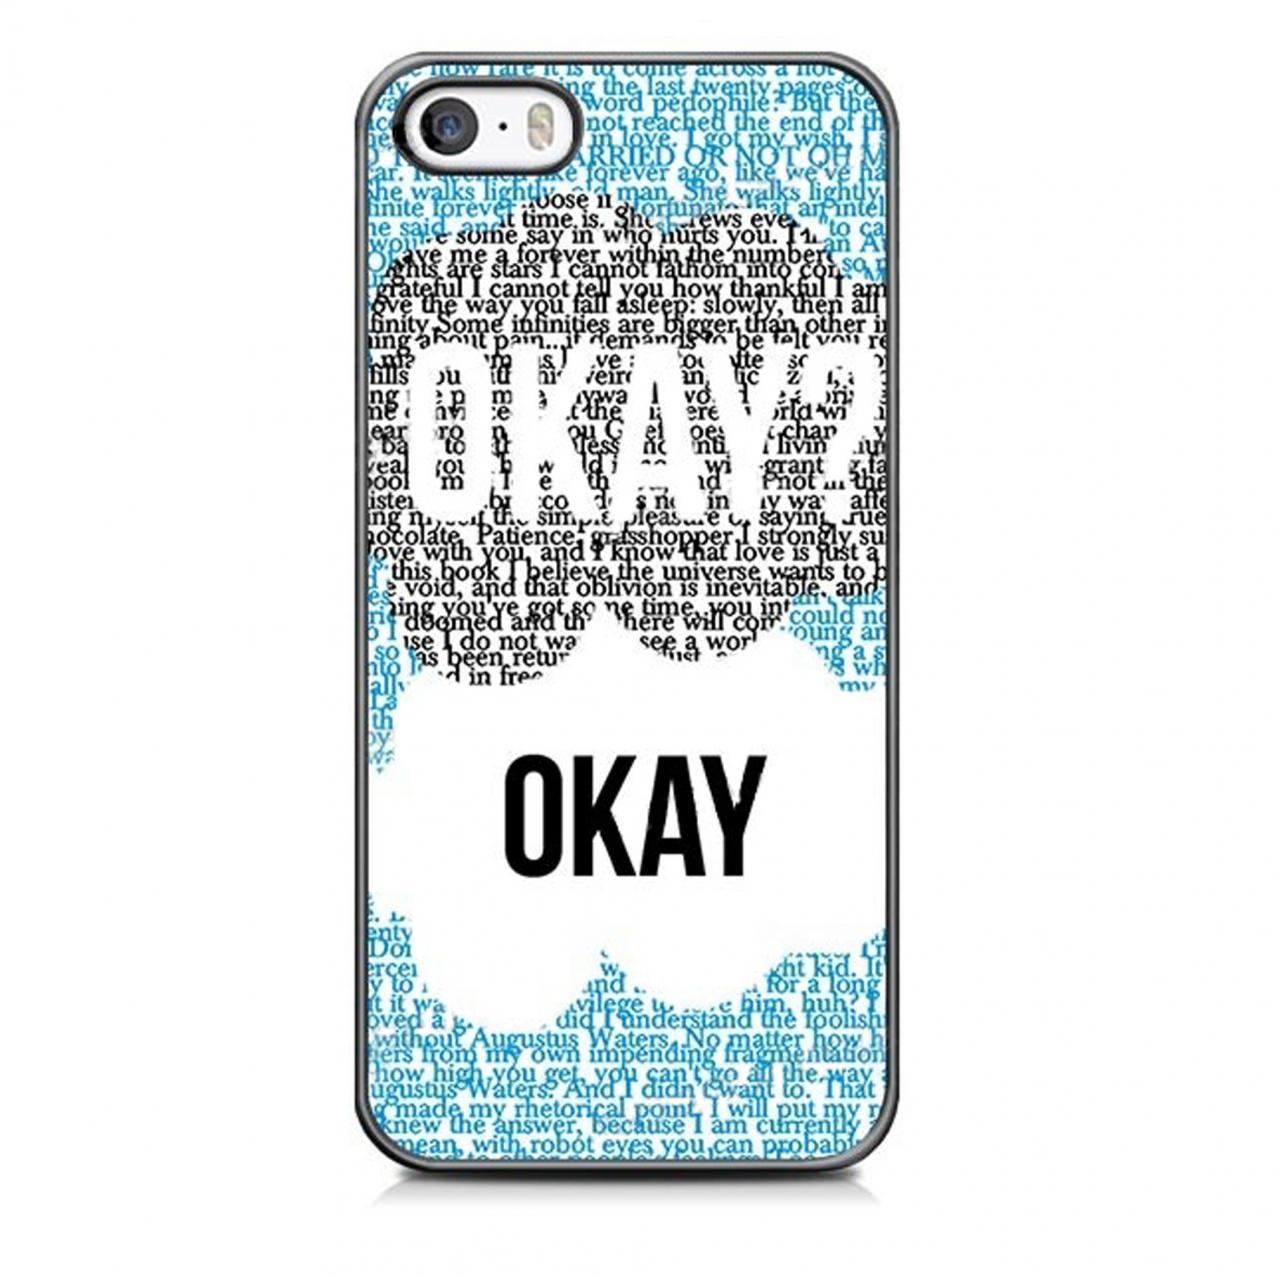 Okay? Okay, Fault In Our Stars Protective Case For Iphone And Samsung Galaxy ( Screen Protector)